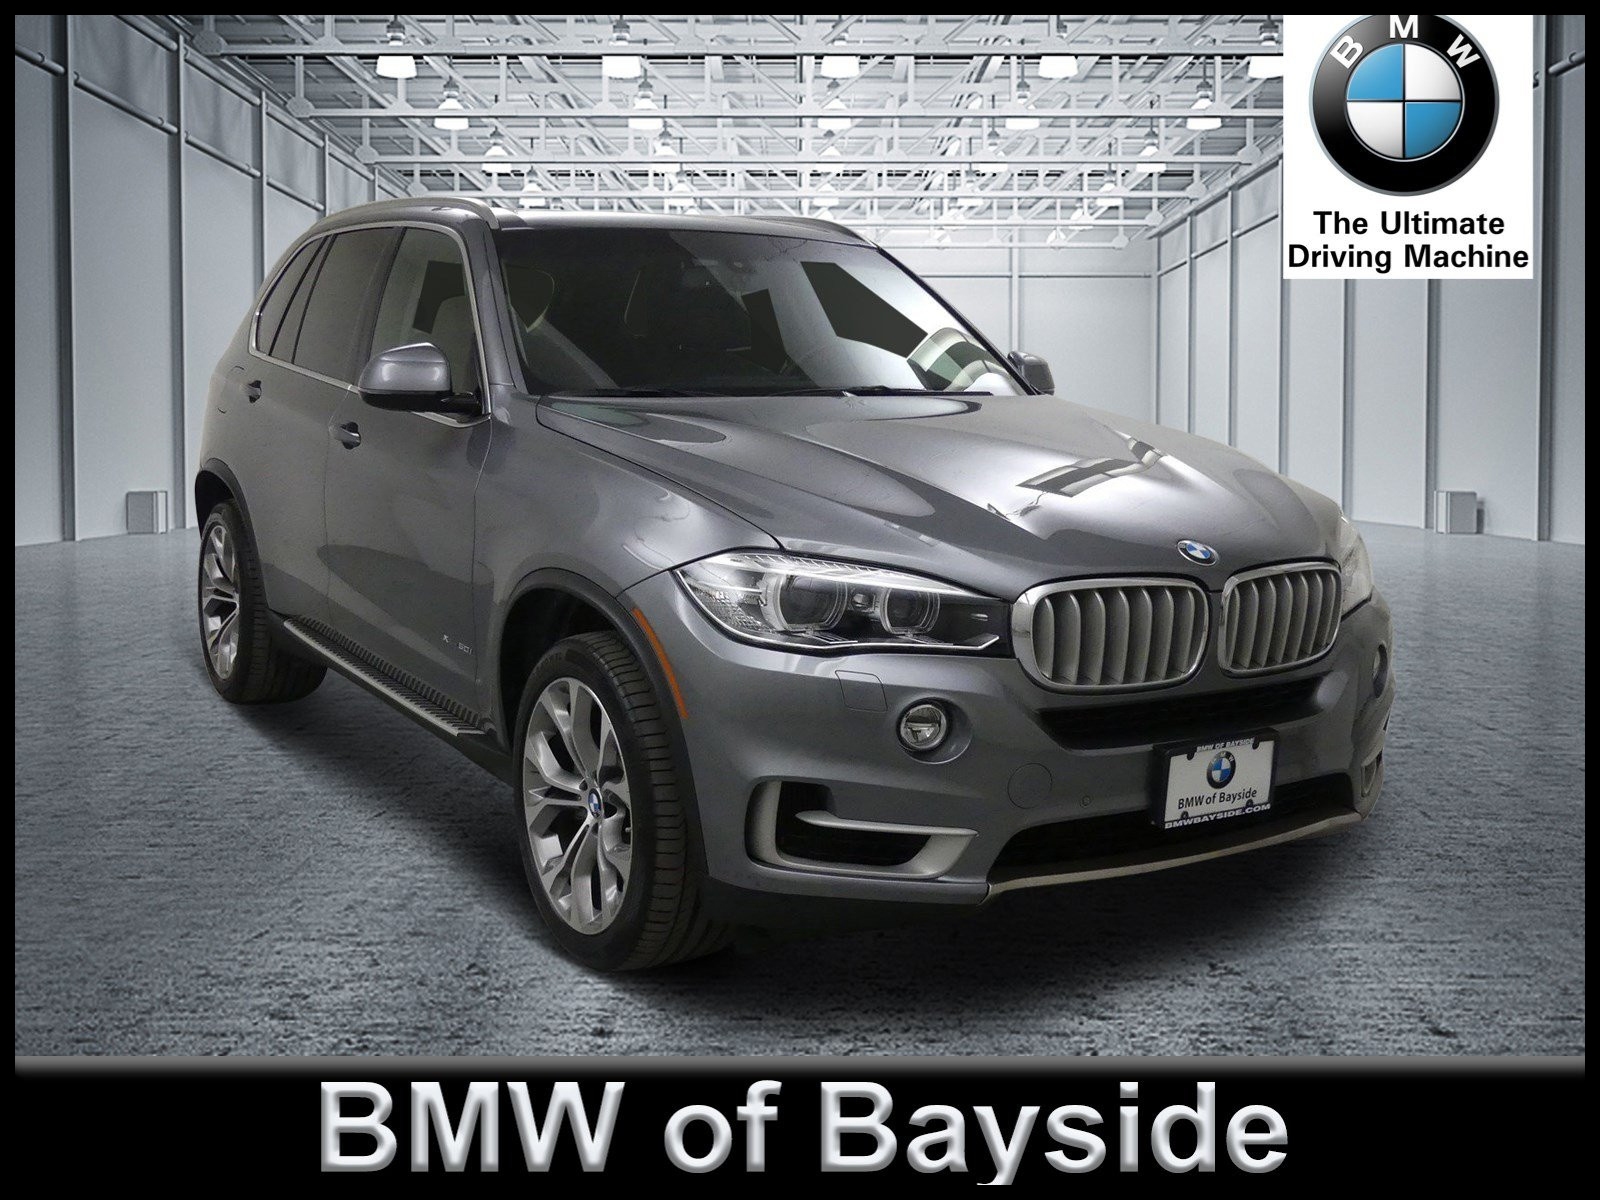 Bmw Roadside assistance Phone Number Bmw Roadside assistance Cost Certified Pre Owned 2015 Bmw X5